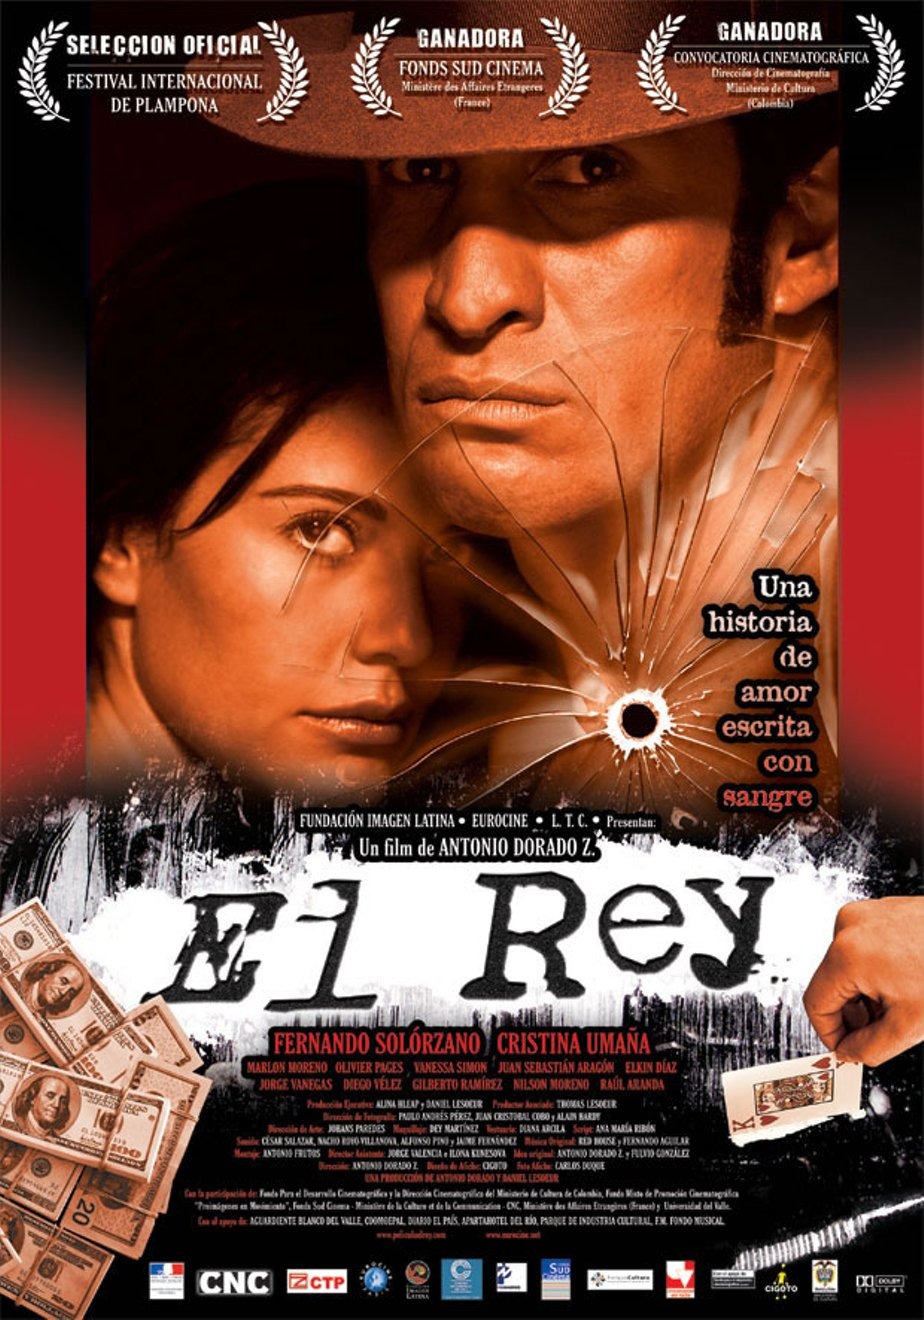 Extra Large Movie Poster Image for El rey (#2 of 2)